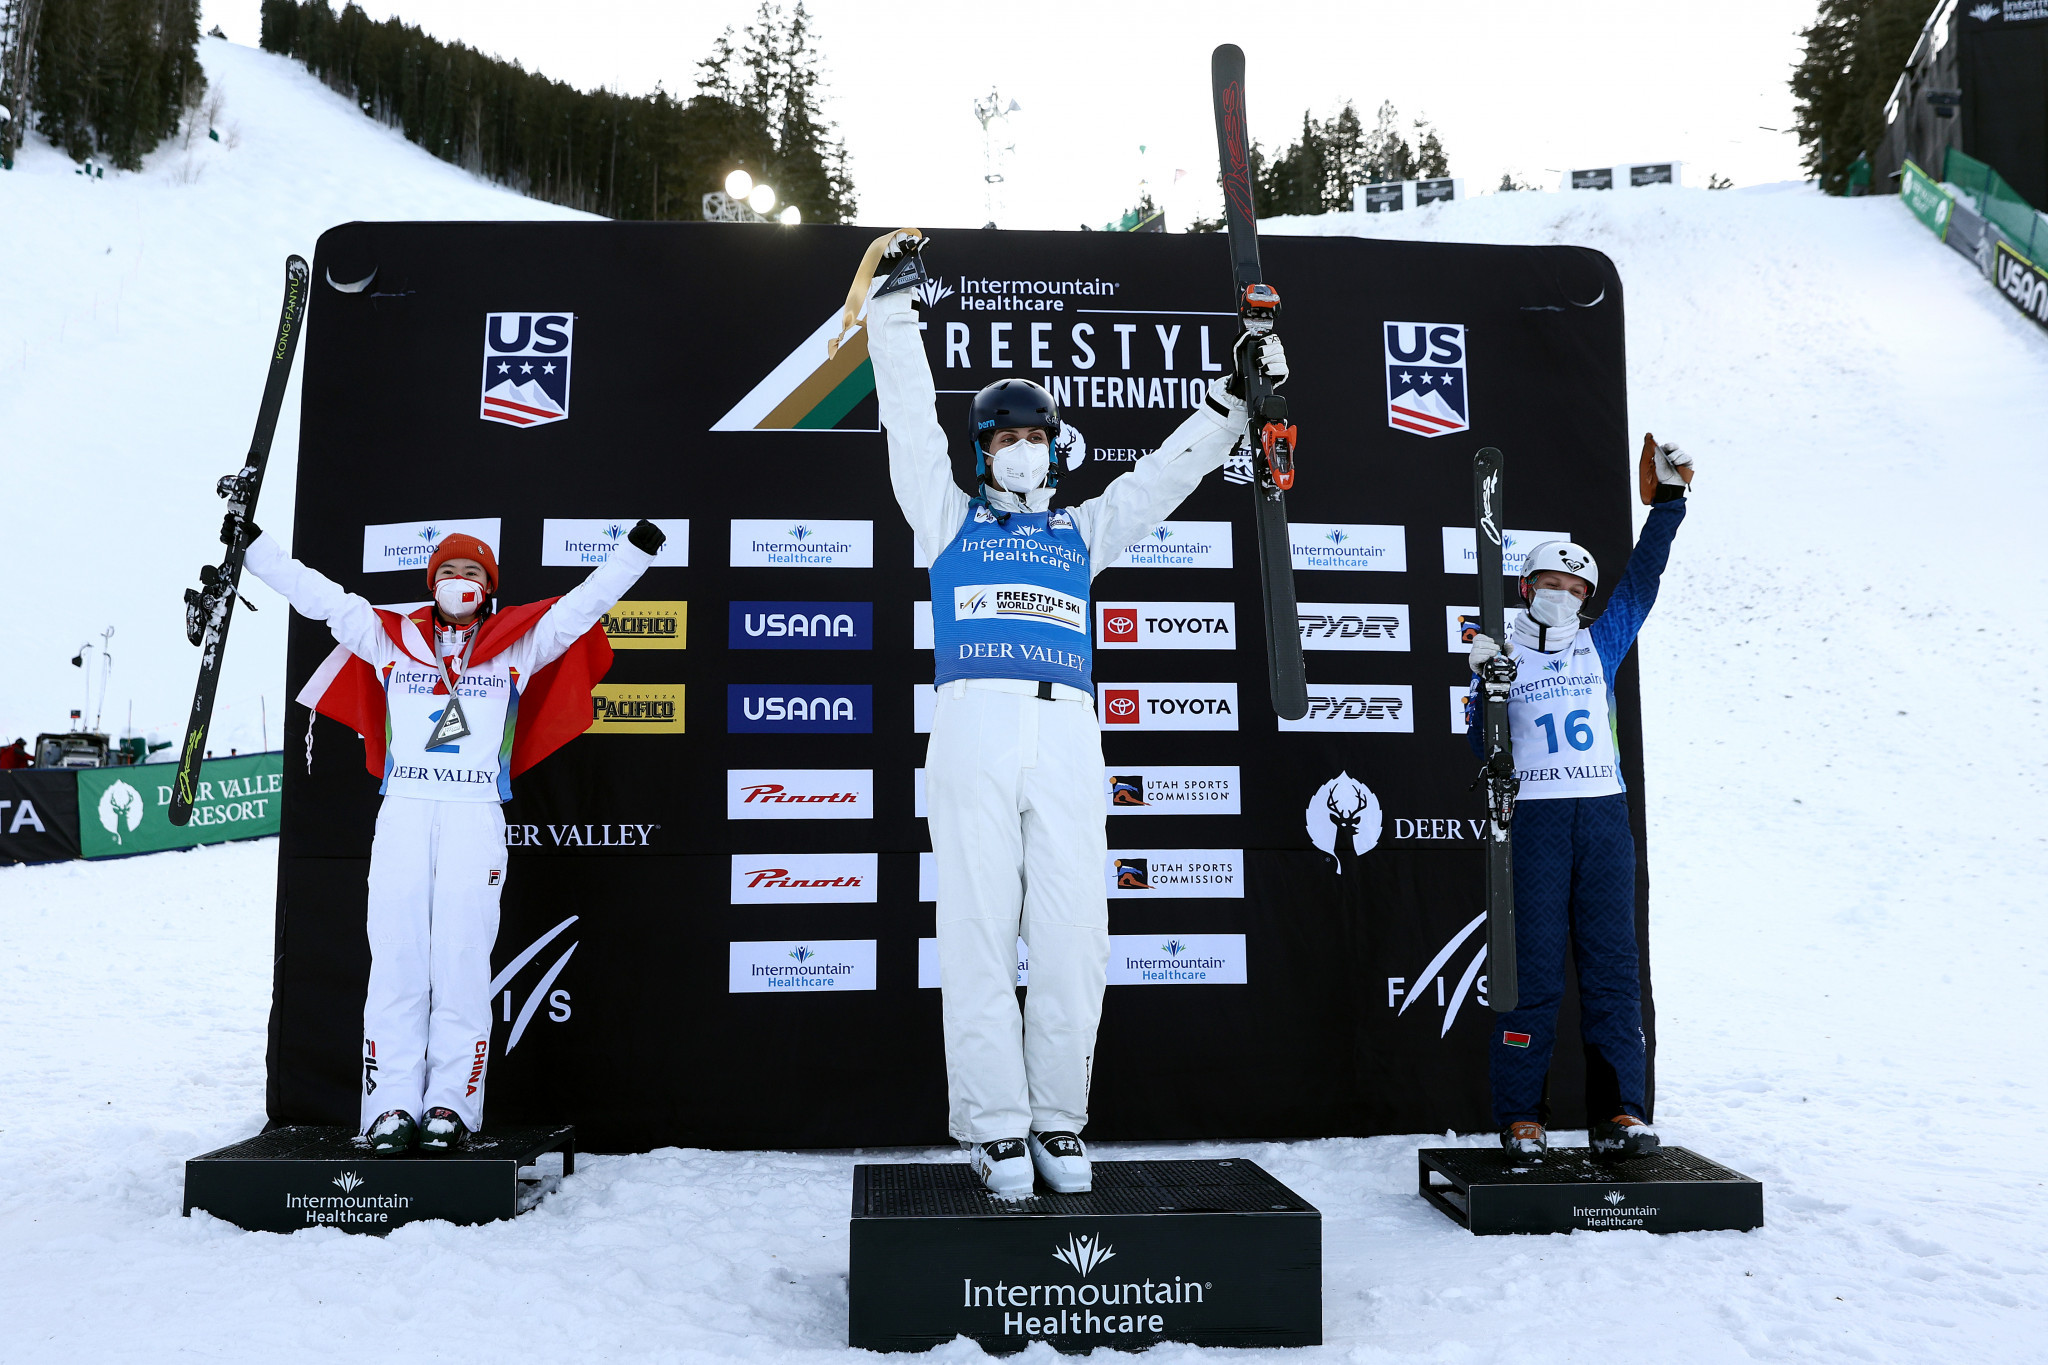 Peel and Wang take Aerials World Cup titles in Deer Valley